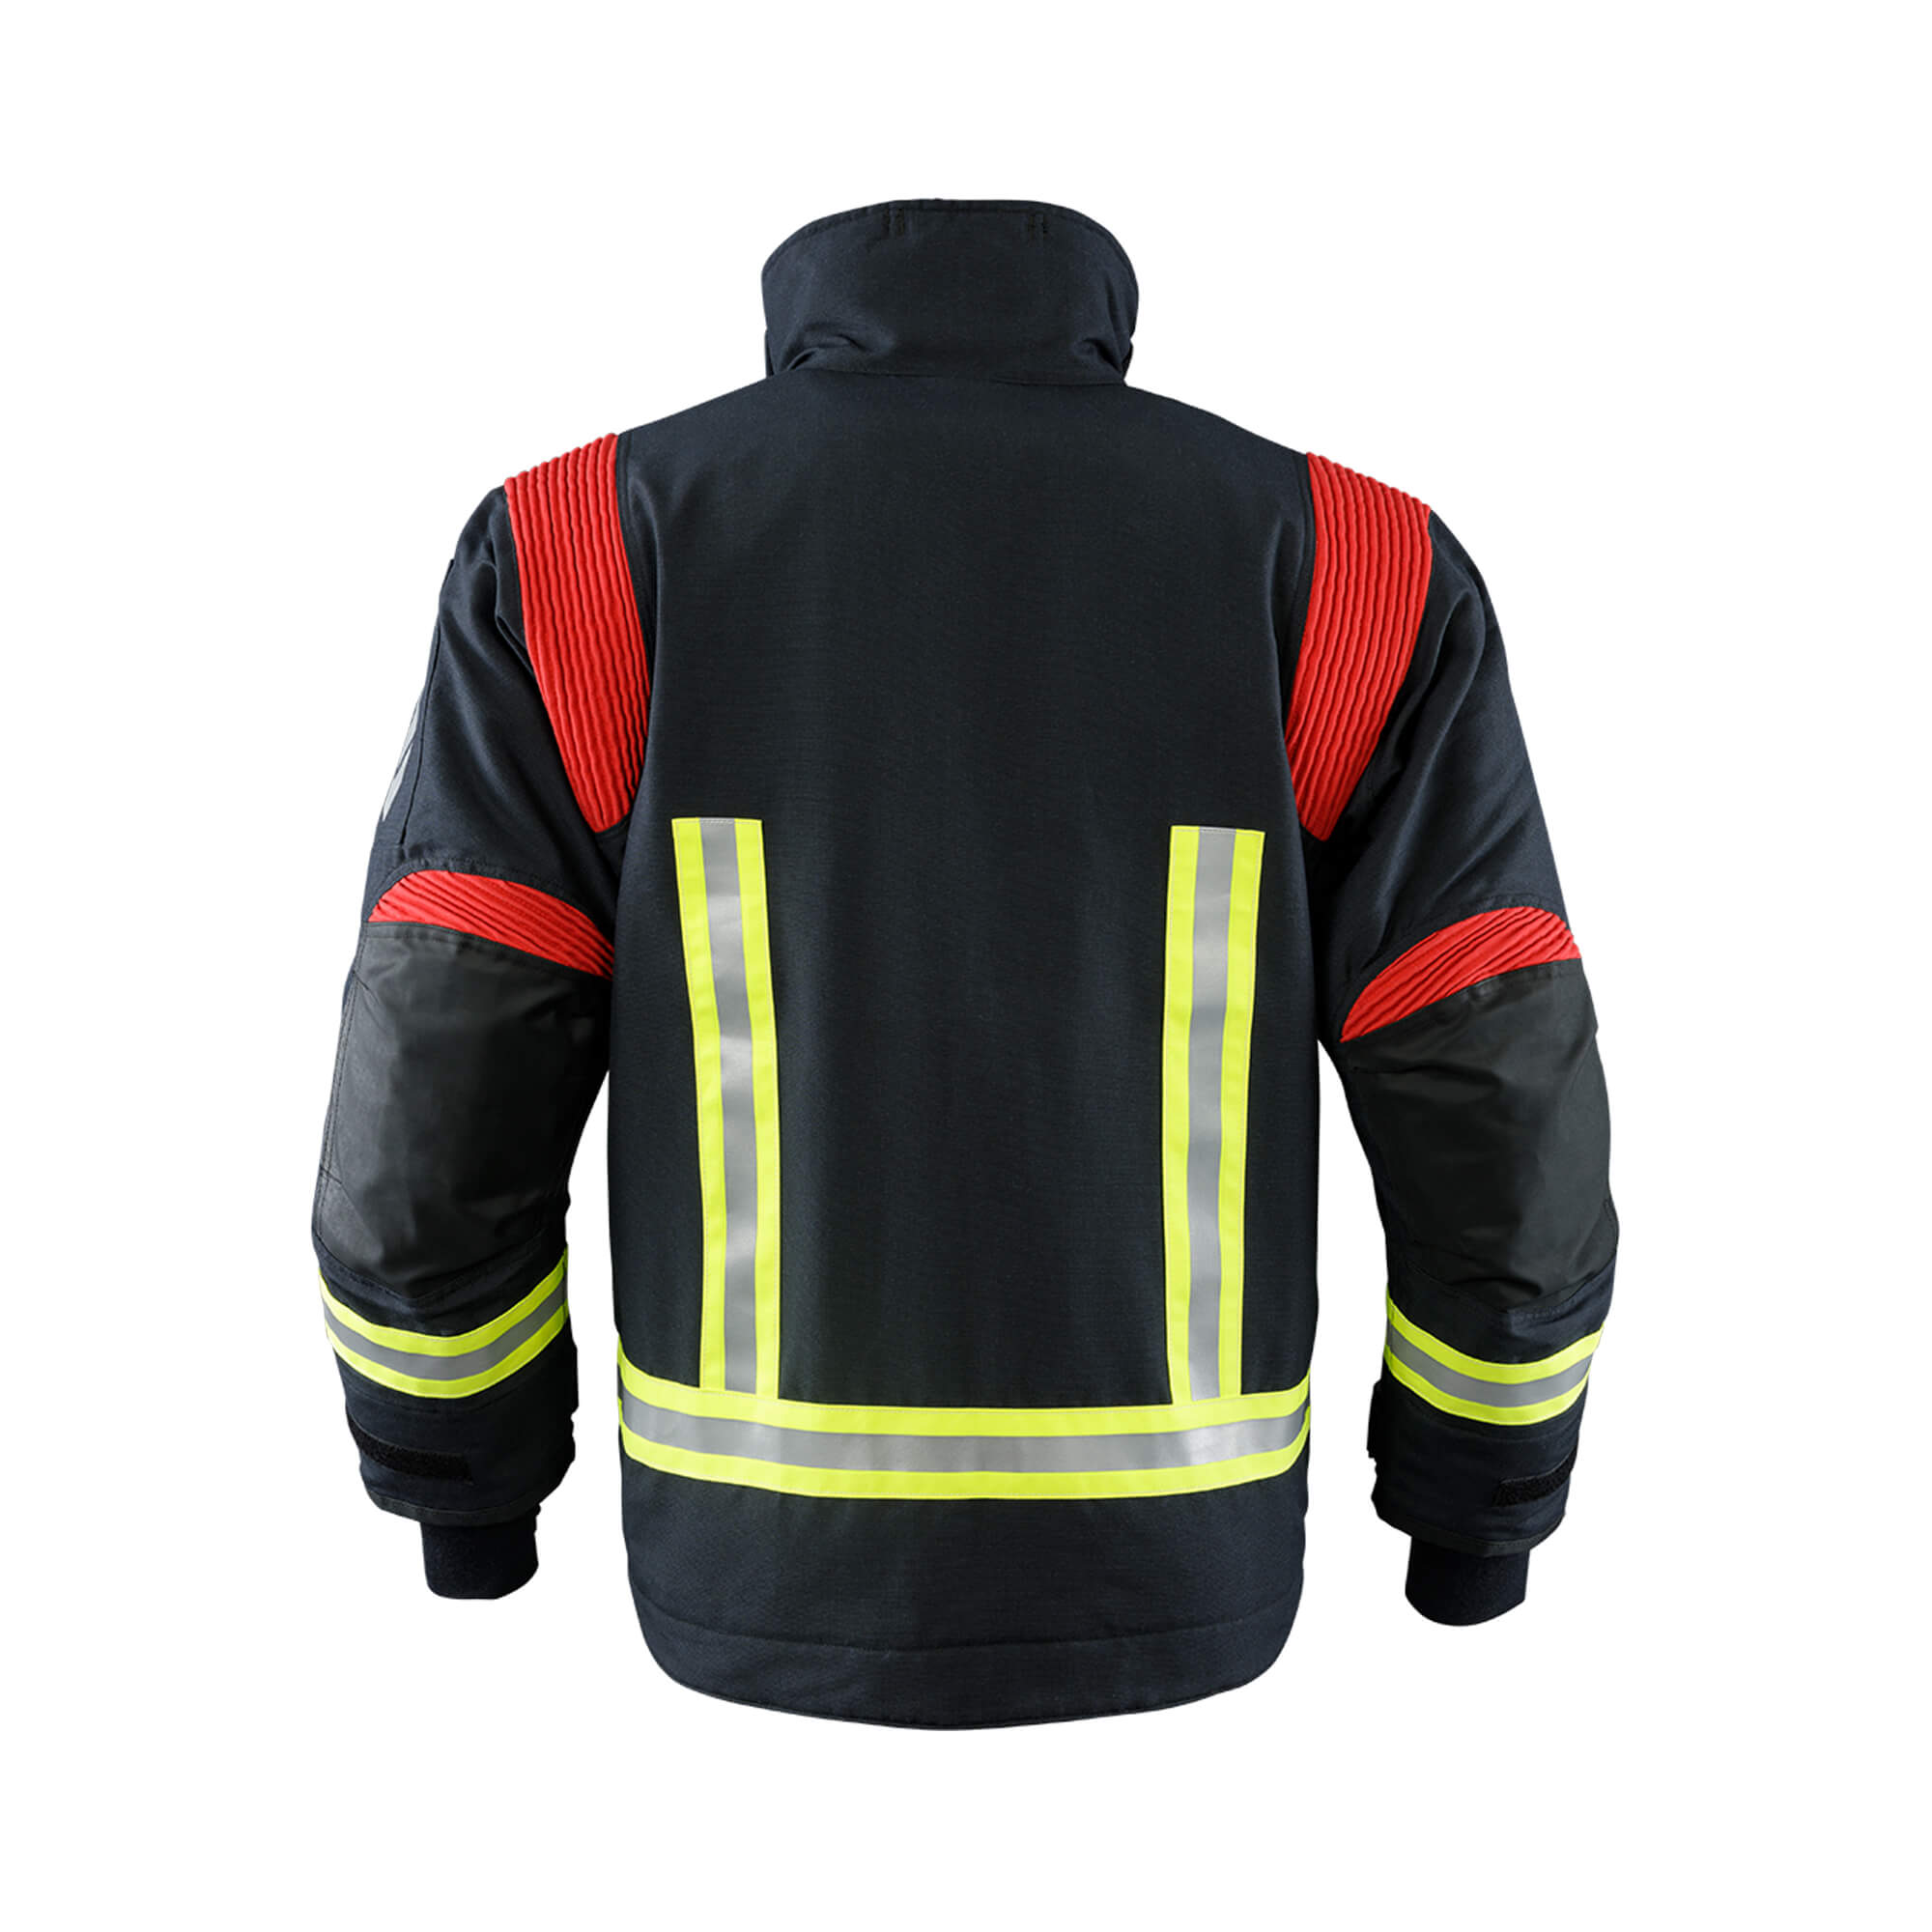 Firefighter Suit for interventions Texport Fire Stretch